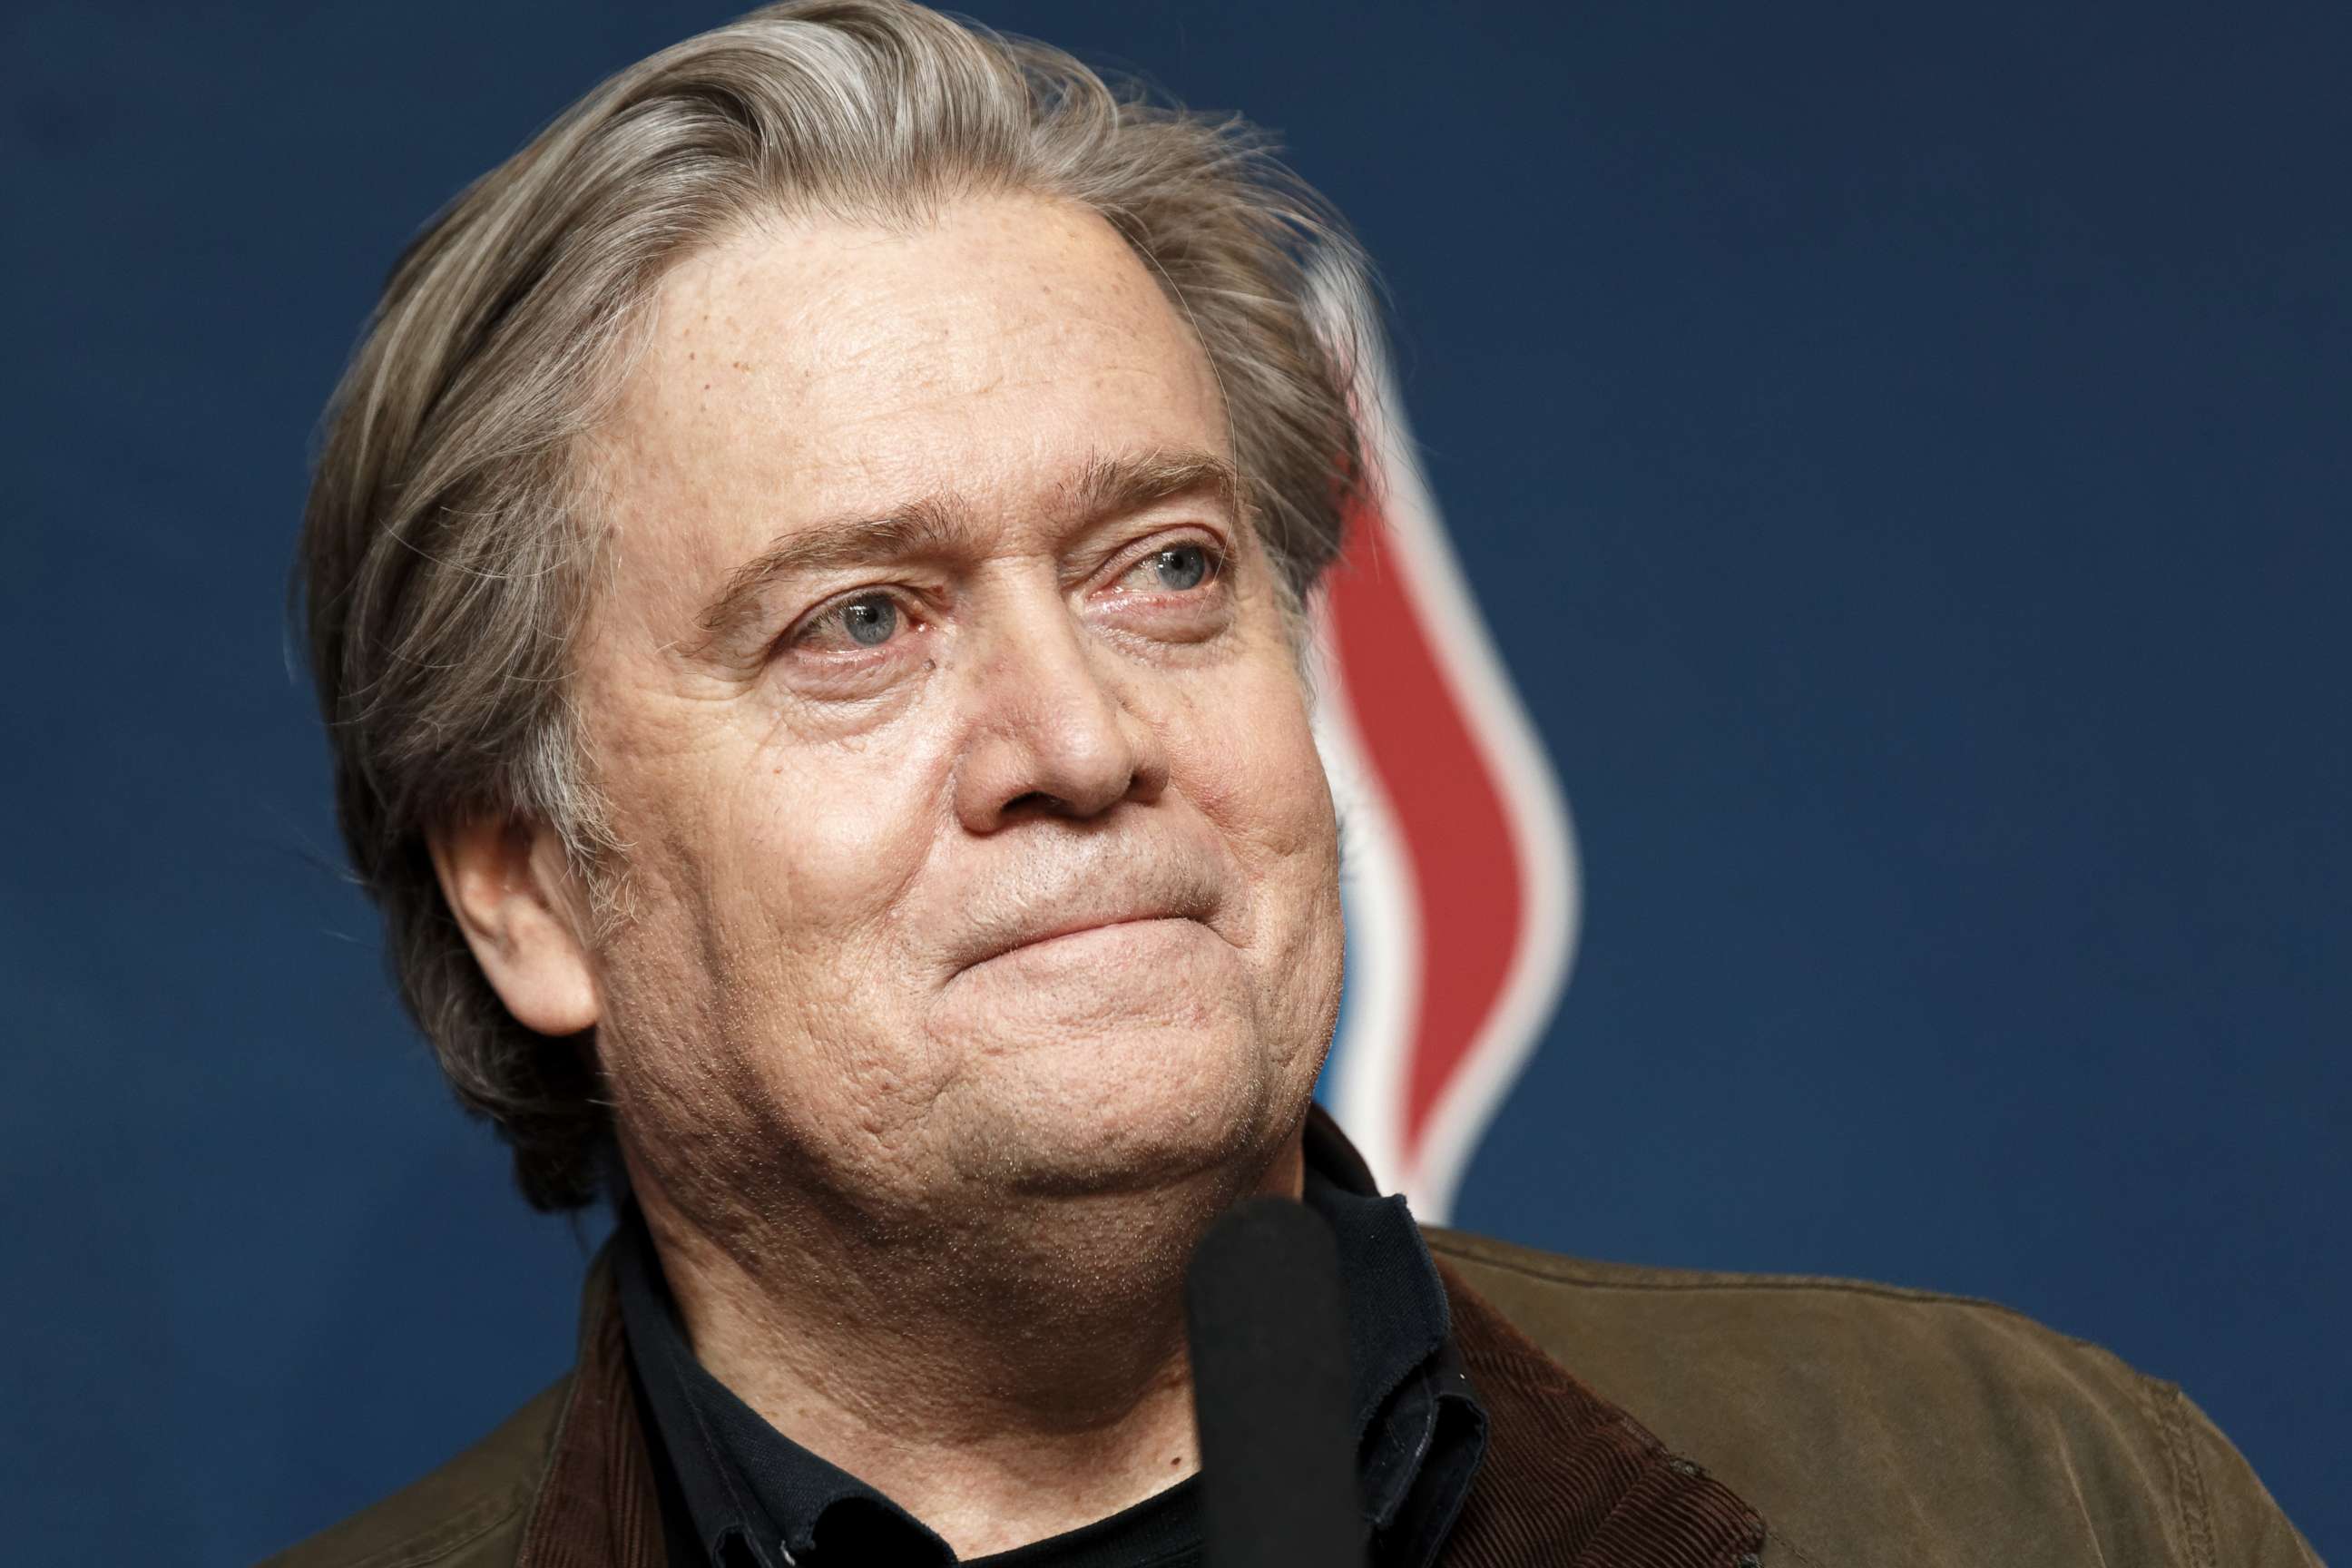 PHOTO: Former President Donald Trump advisor Steve Bannon gives a press conference during the French far-right Front National (FN) party annual congress, March 10, 2018, at the Grand Palais in Lille, north of France.